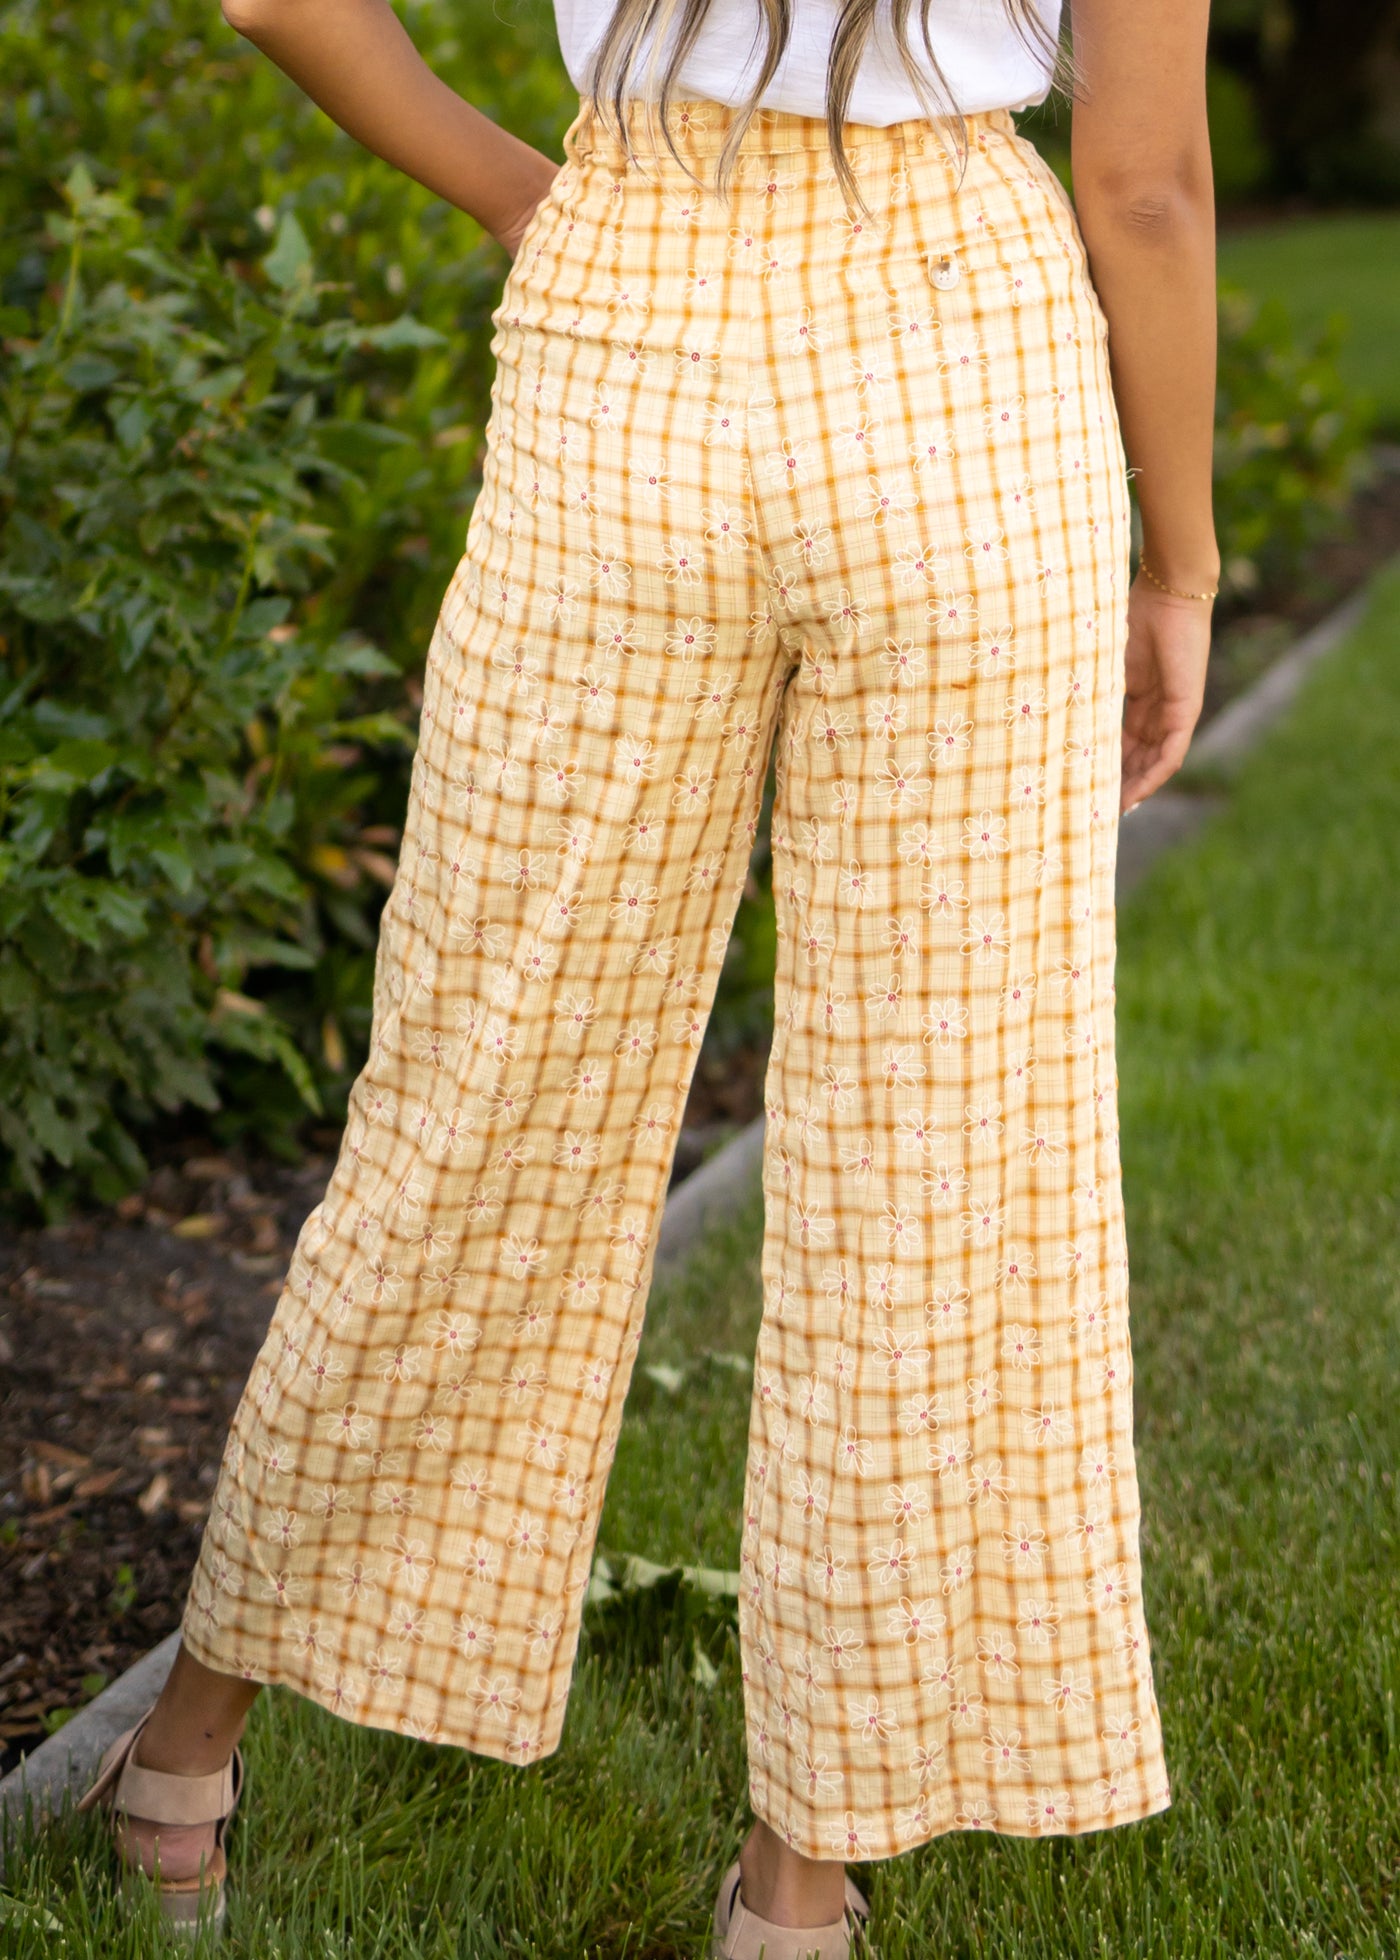 Back view of yellow pants